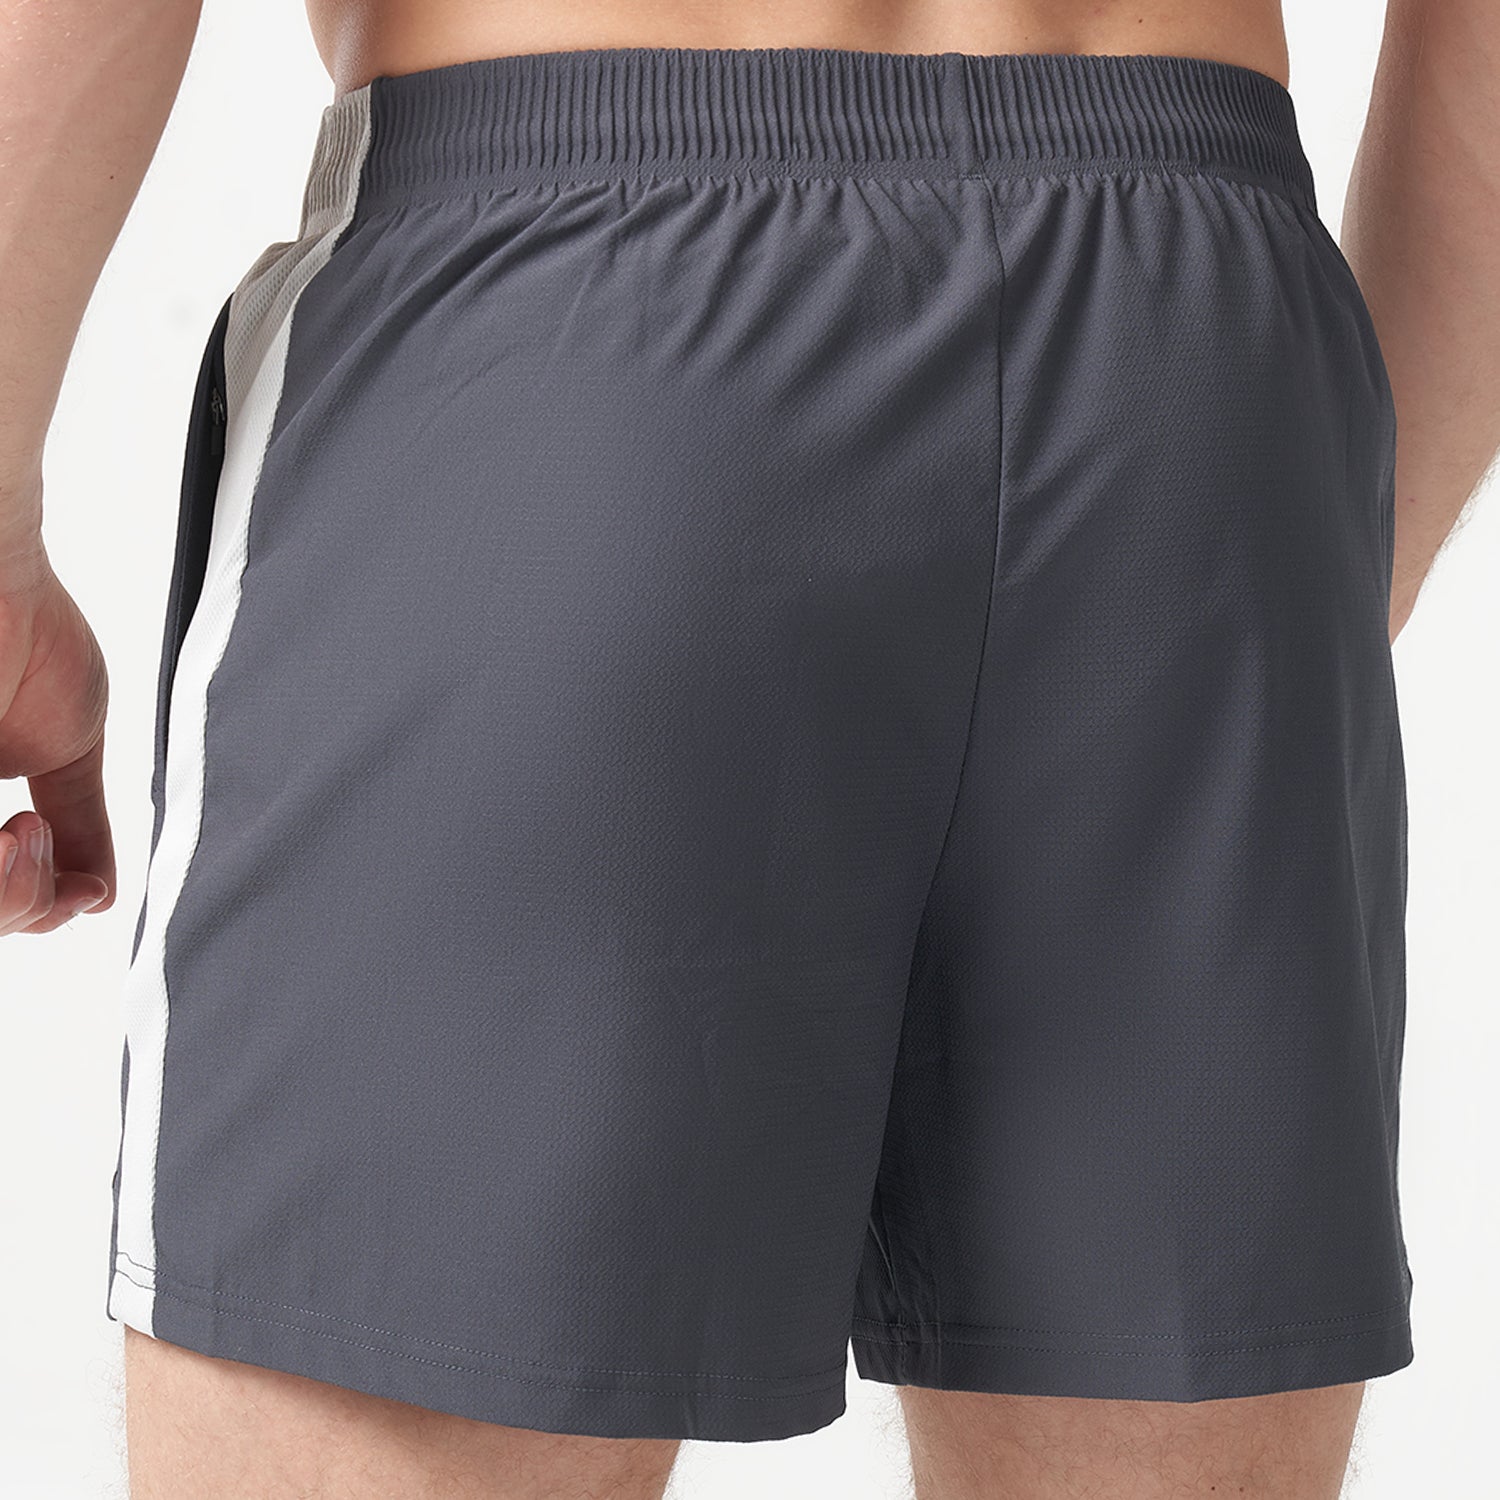 squatwolf-gym-wear-lab360-5-inch-superstretch shorts-grey-workout-short-for-men